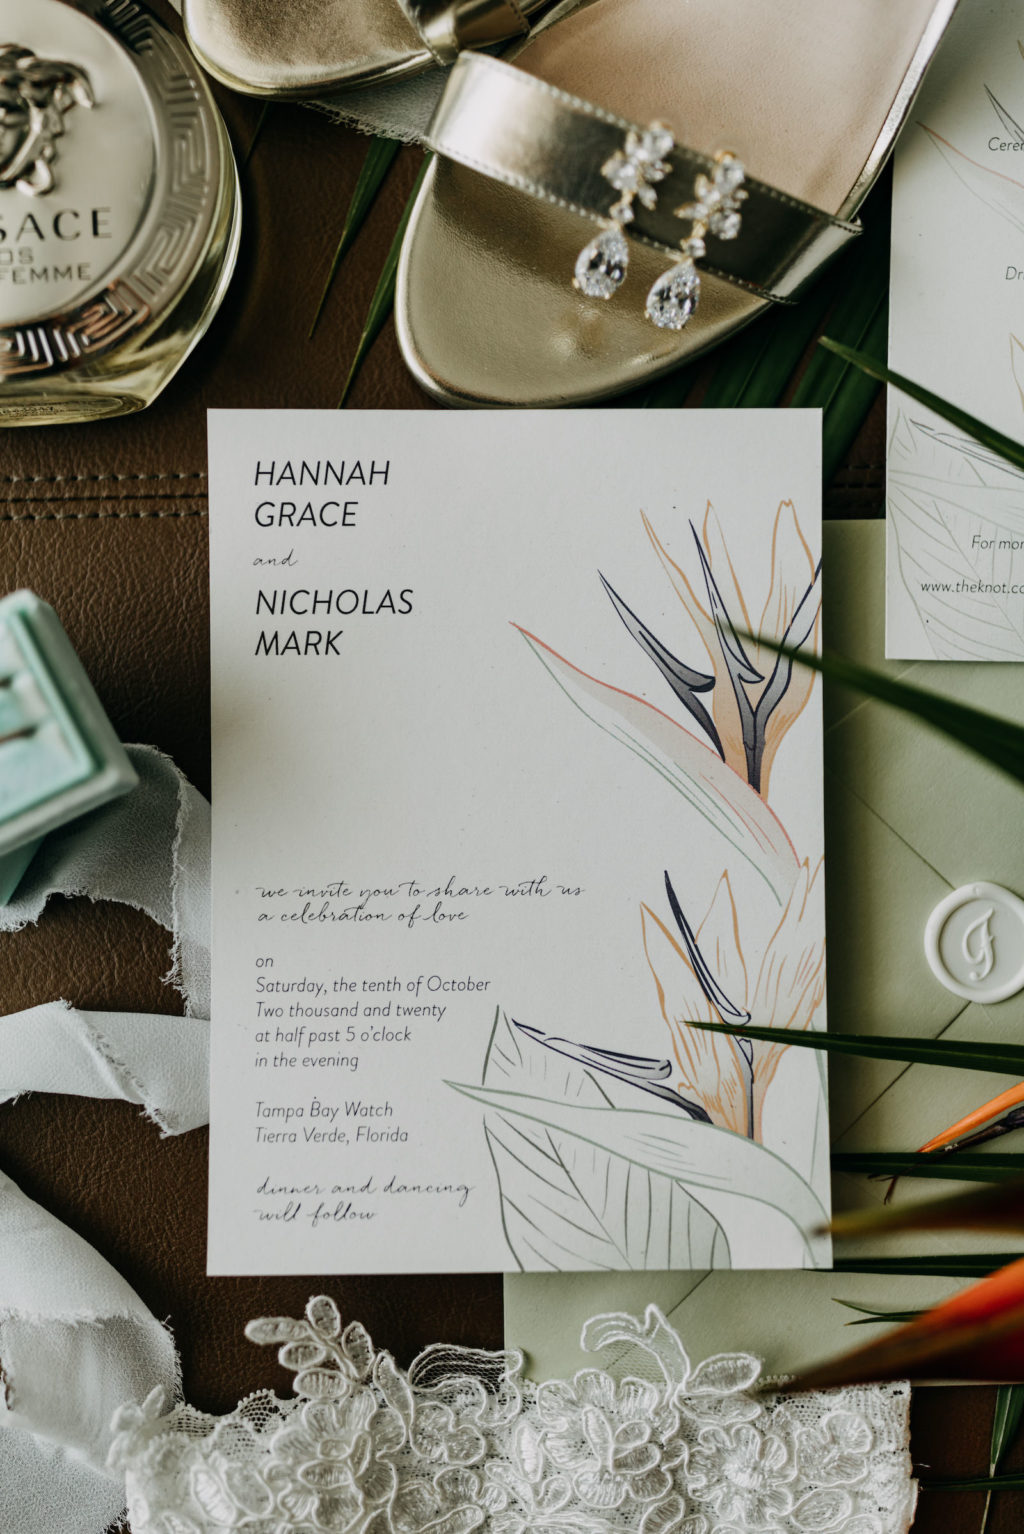 Tropical Elegant Wedding Invitation, Sage Green, White Invitation with Tropical Floral Design, Silver Strappy Wedding Shoes, Versace Perfume Bottle, Wedding Rings in Mint Green Box | Tampa Bay Wedding Photographer Amber McWhorter Photography